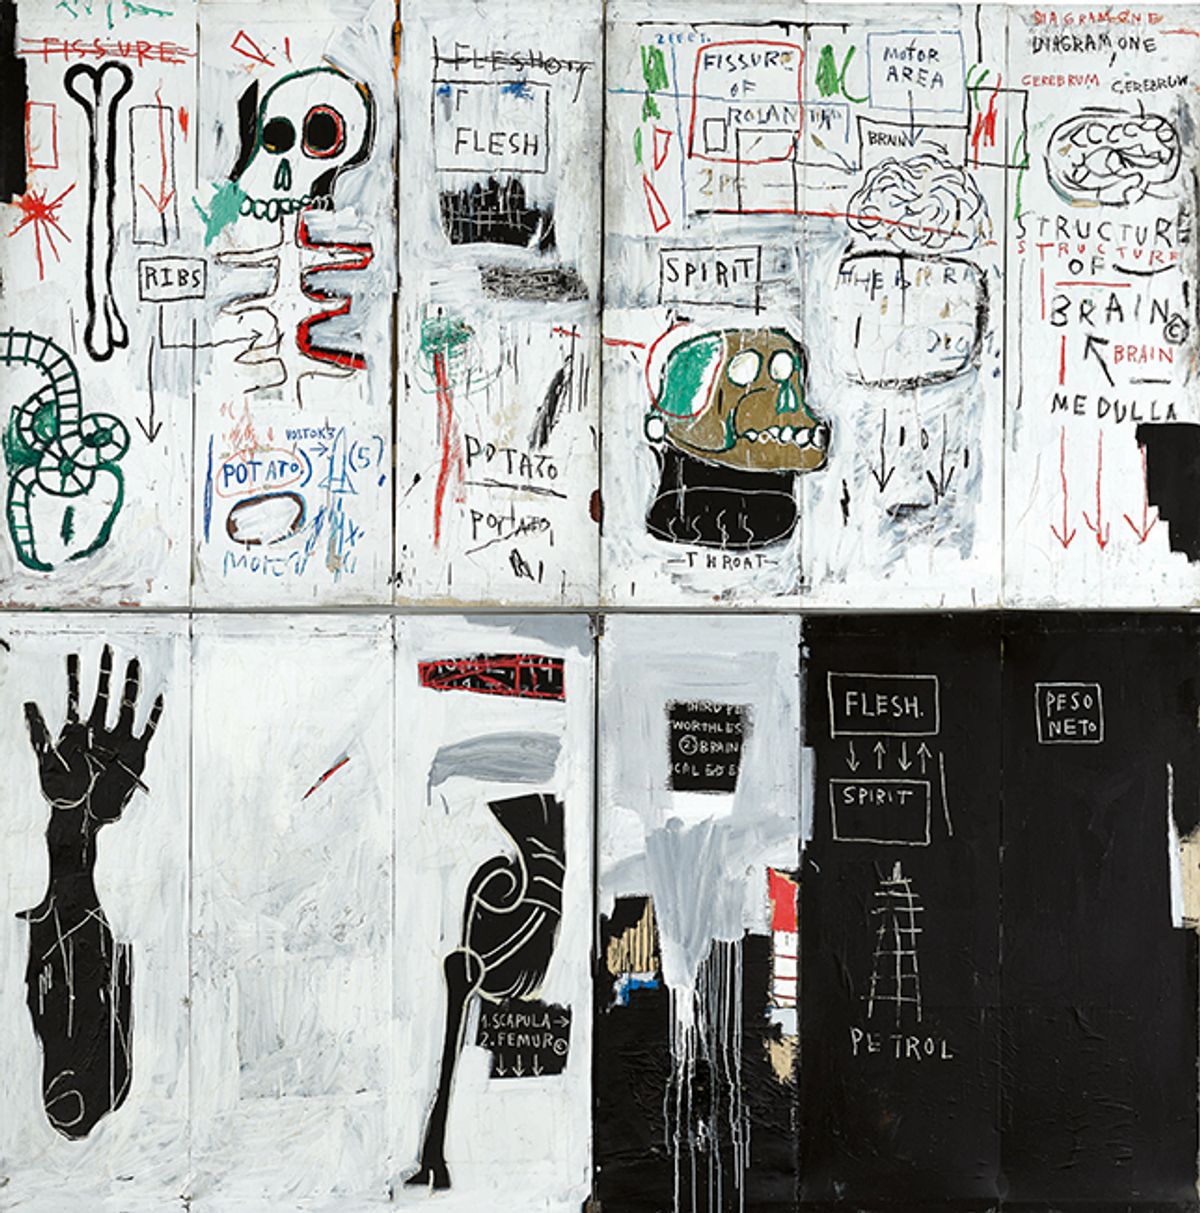 Jean-Michel Basquiat's Flesh and Spirit (1982-83) will be offered at Sotheby's New York on 16 May with an estimate in the region of $30m © 2018 Estate of Jean-Michel Basquiat / Artists Rights Society (ARS), New York, NY. Courtesy of Sotheby's